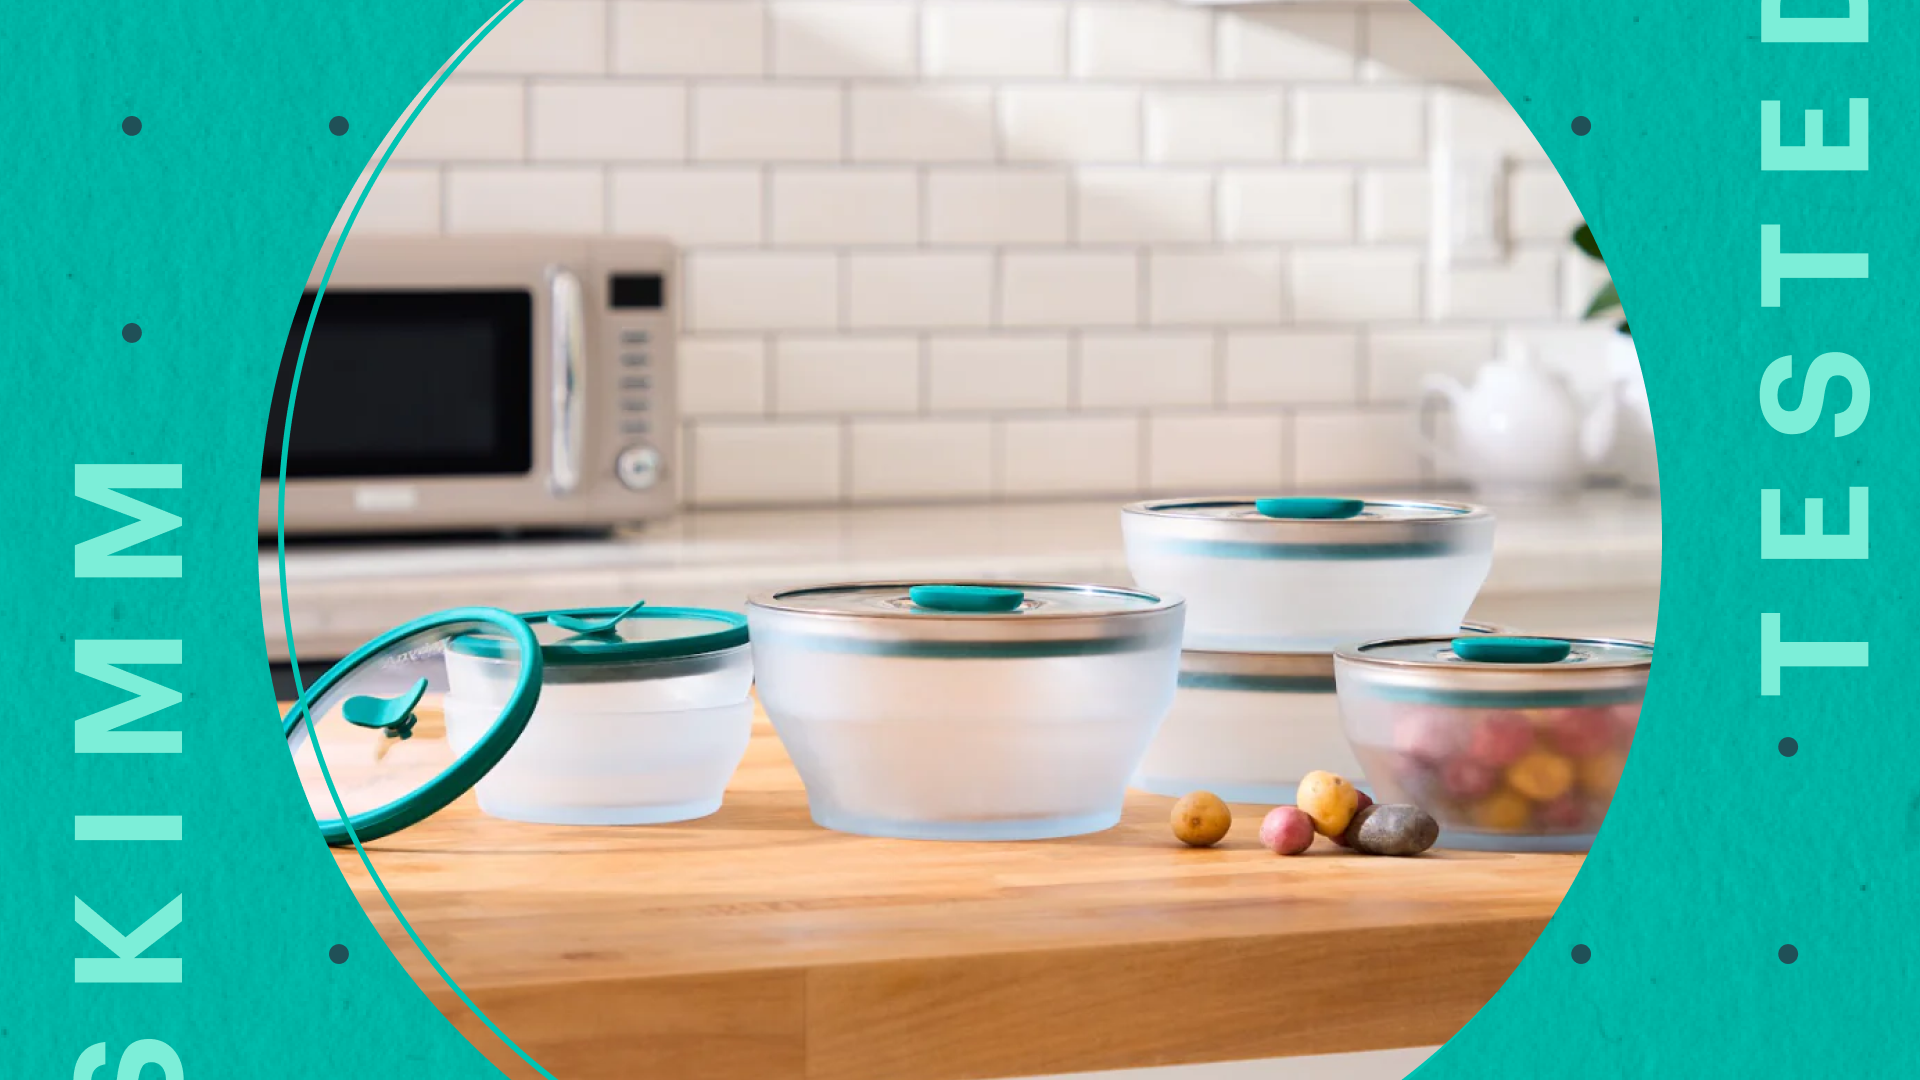 Anyday Microwave Cookware Set | The Complete Set